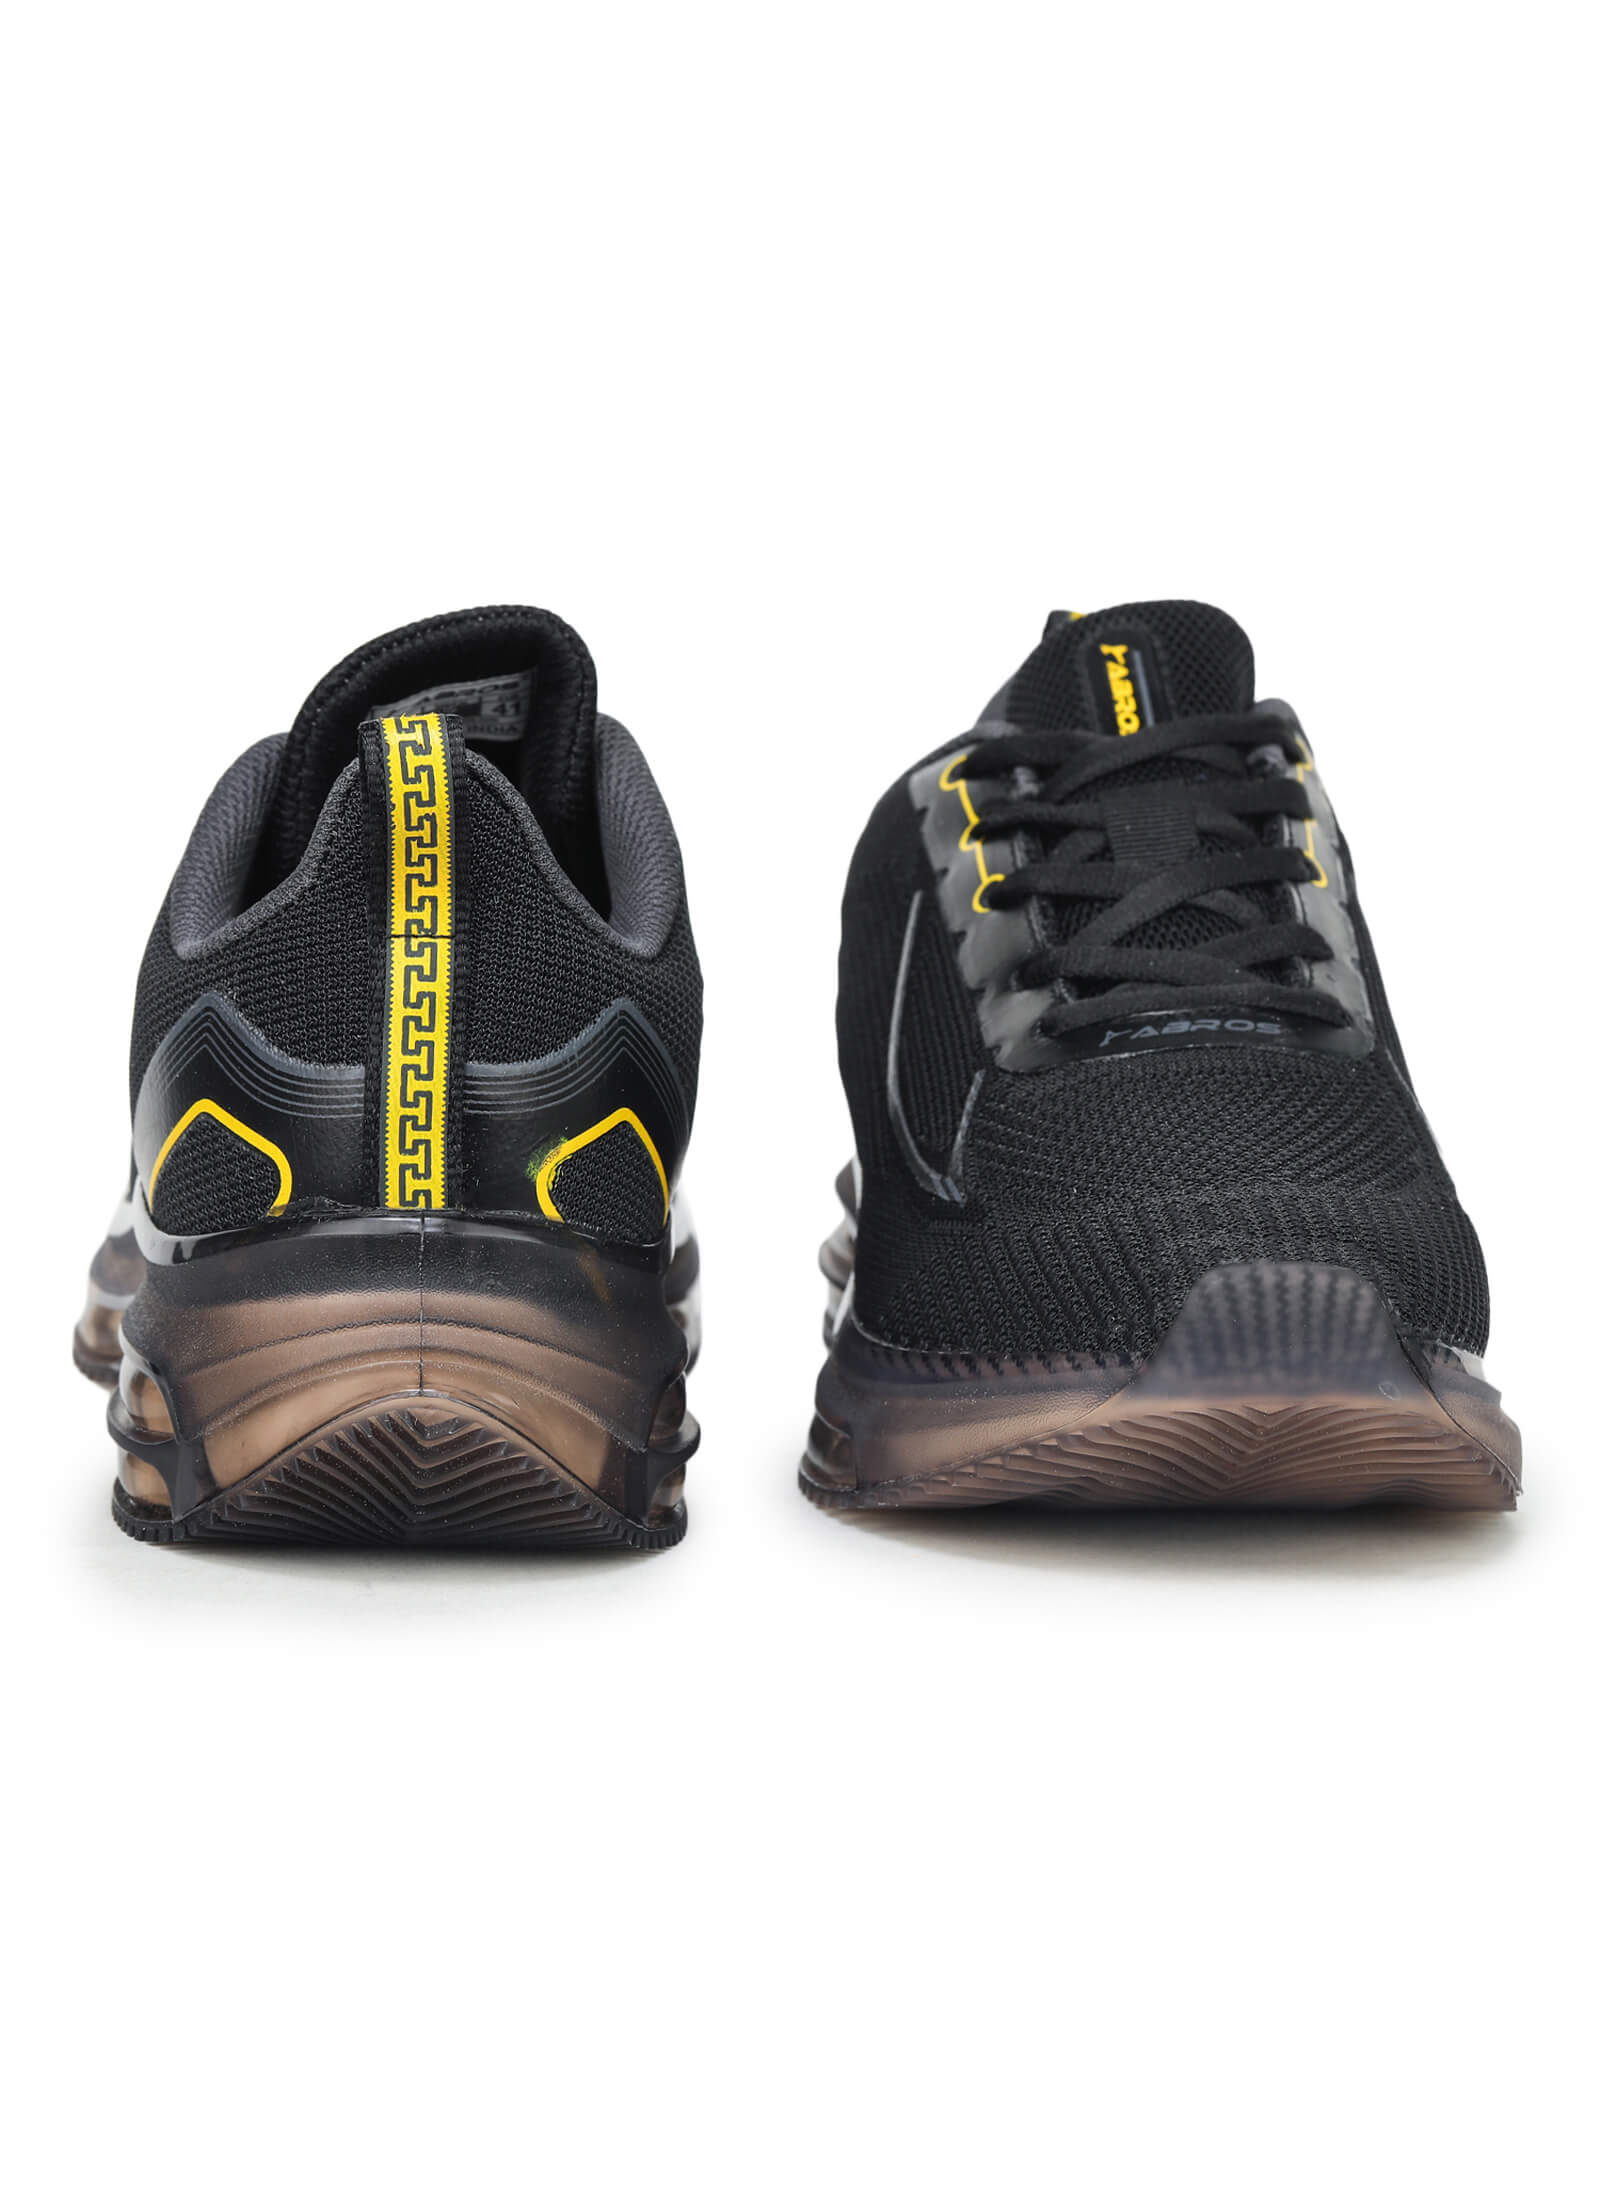 Courage Look Trendy Sports Shoes For Men